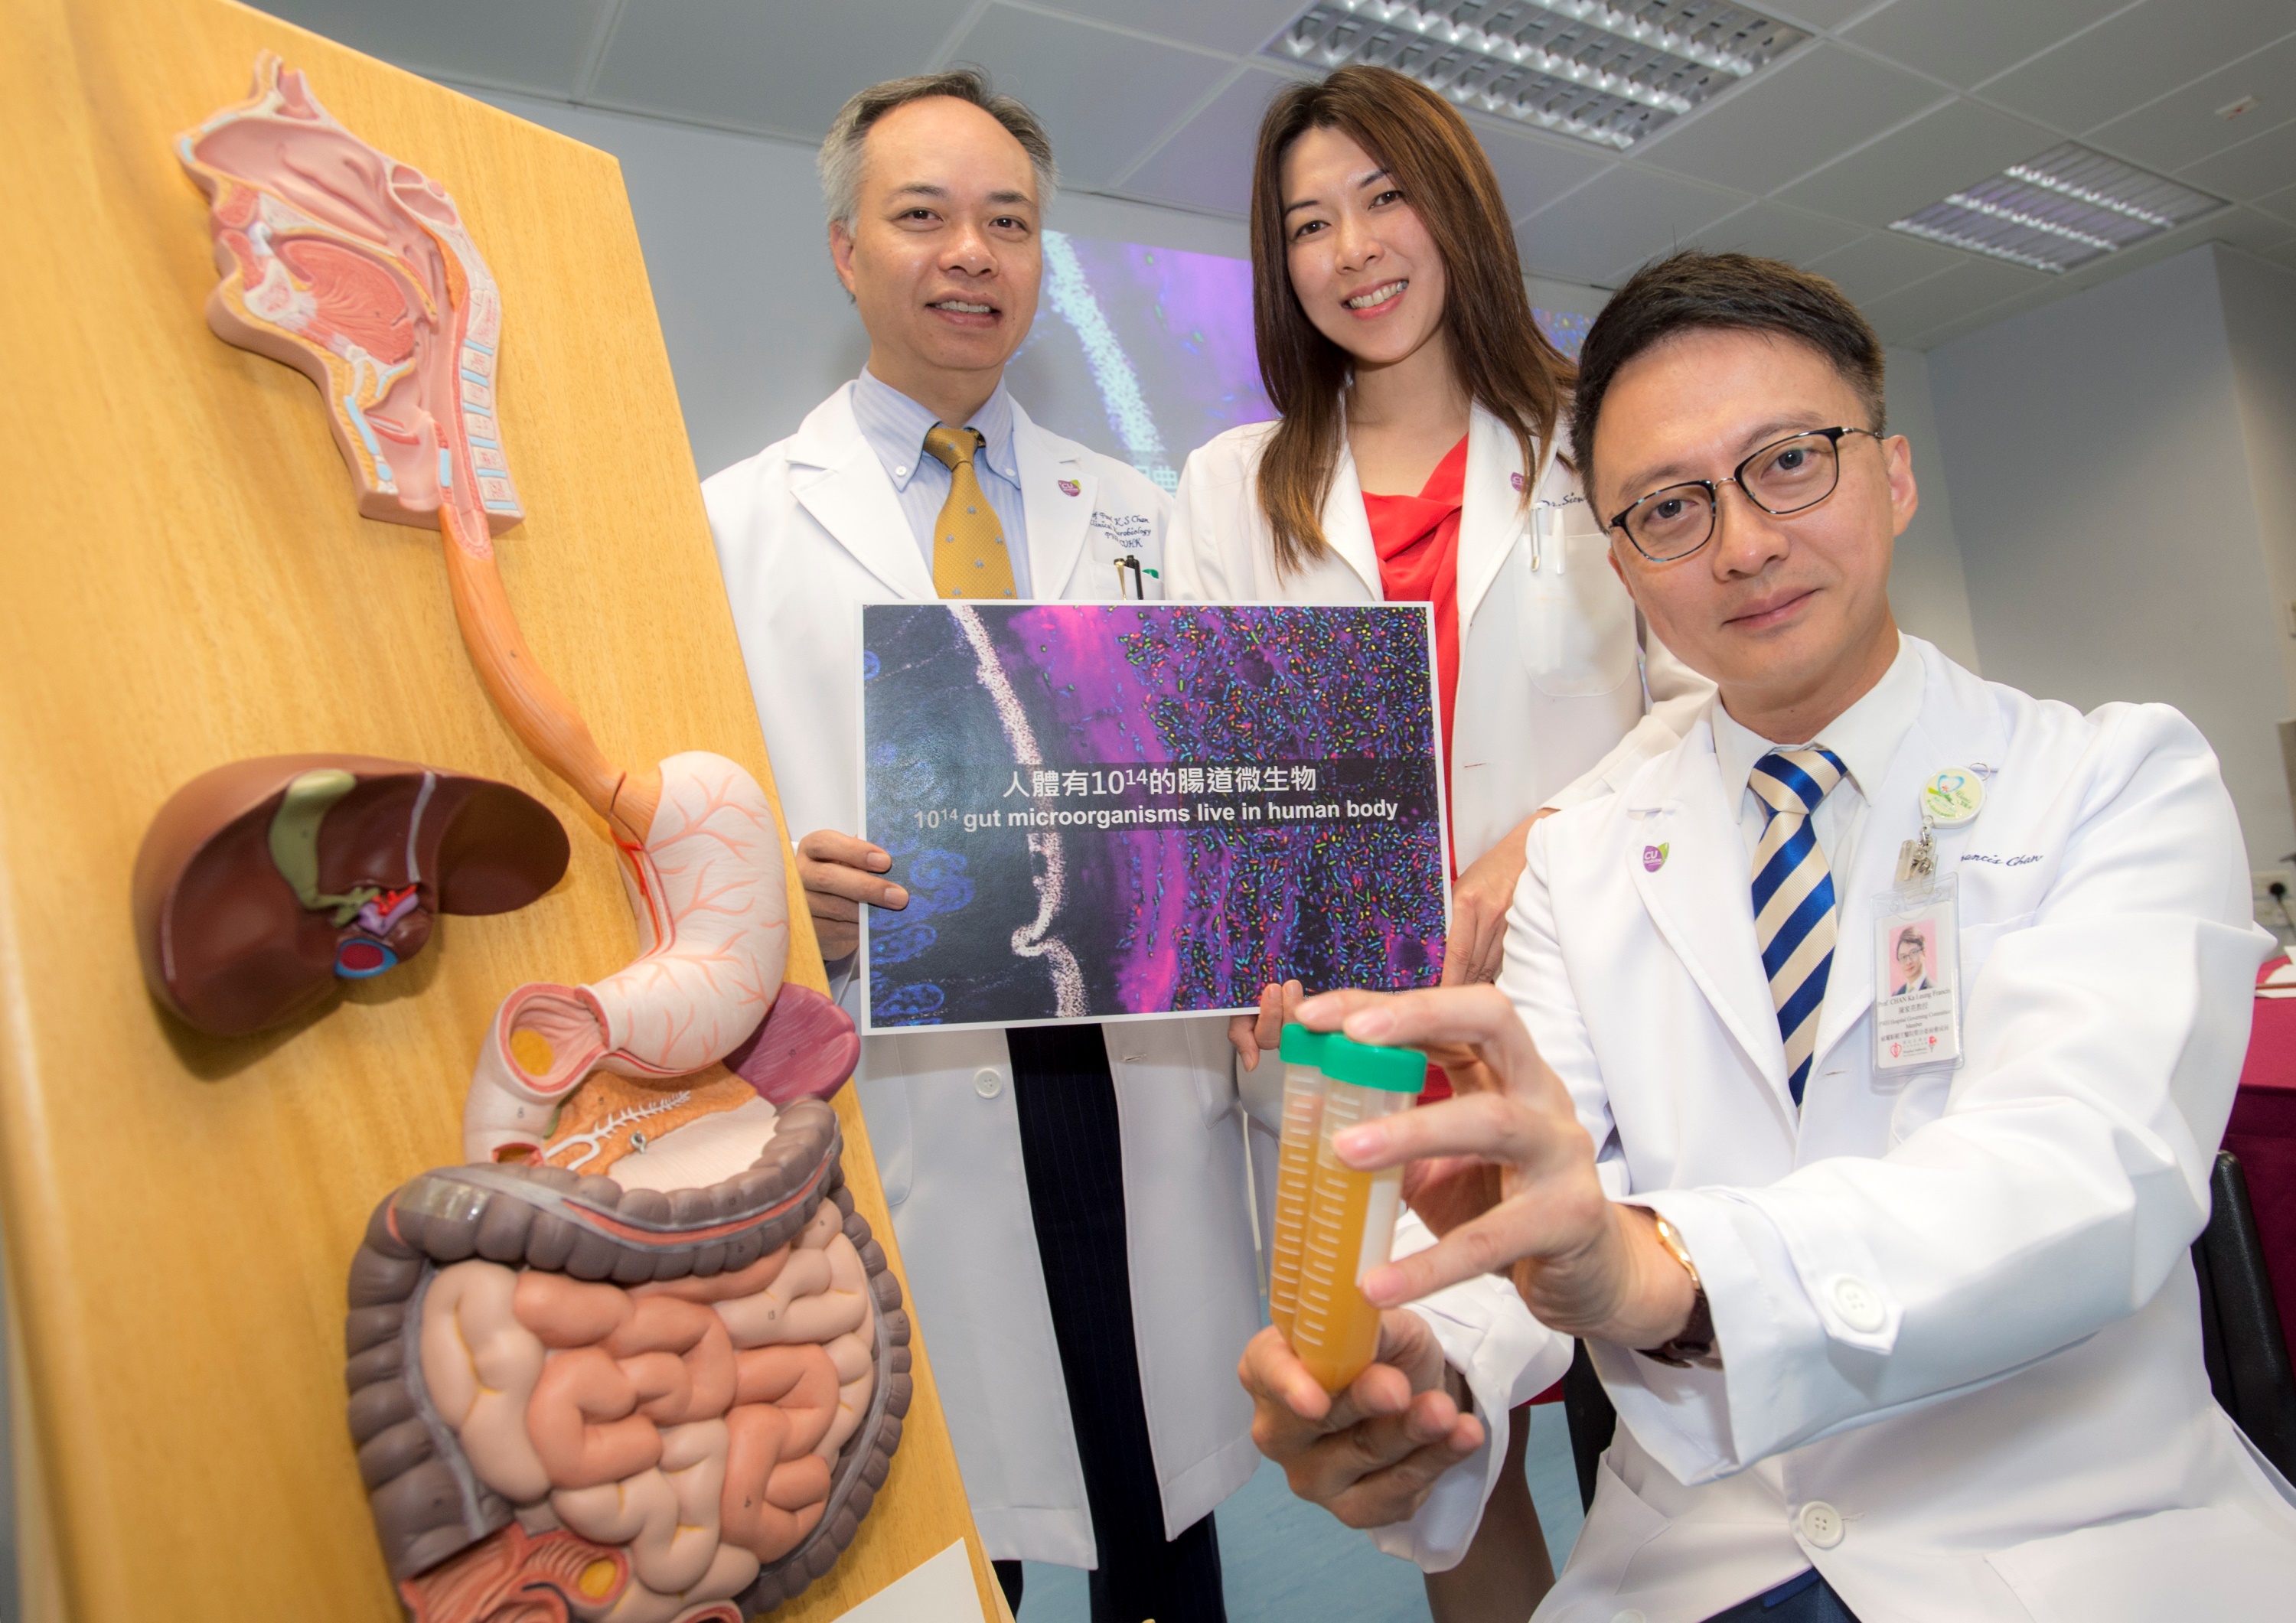 The Faculty of Medicine at CUHK established Asia’s first microbiota transplantation and research centre to unravel the role of the gut microbiota in human health. The Centre is currently investigating if microbiota transplantation can be a potential treatment for obesity. (From left) Professor Paul Kay Sheung CHAN, Chairman of the Department of Microbiology; Professor Siew Chien NG, Professor of the Department of Medicine and Therapeutics and Professor Francis KL CHAN, Dean of the Faculty of Medicine and Choh-Ming Li Professor of Medicine and Therapeutics at CUHK.